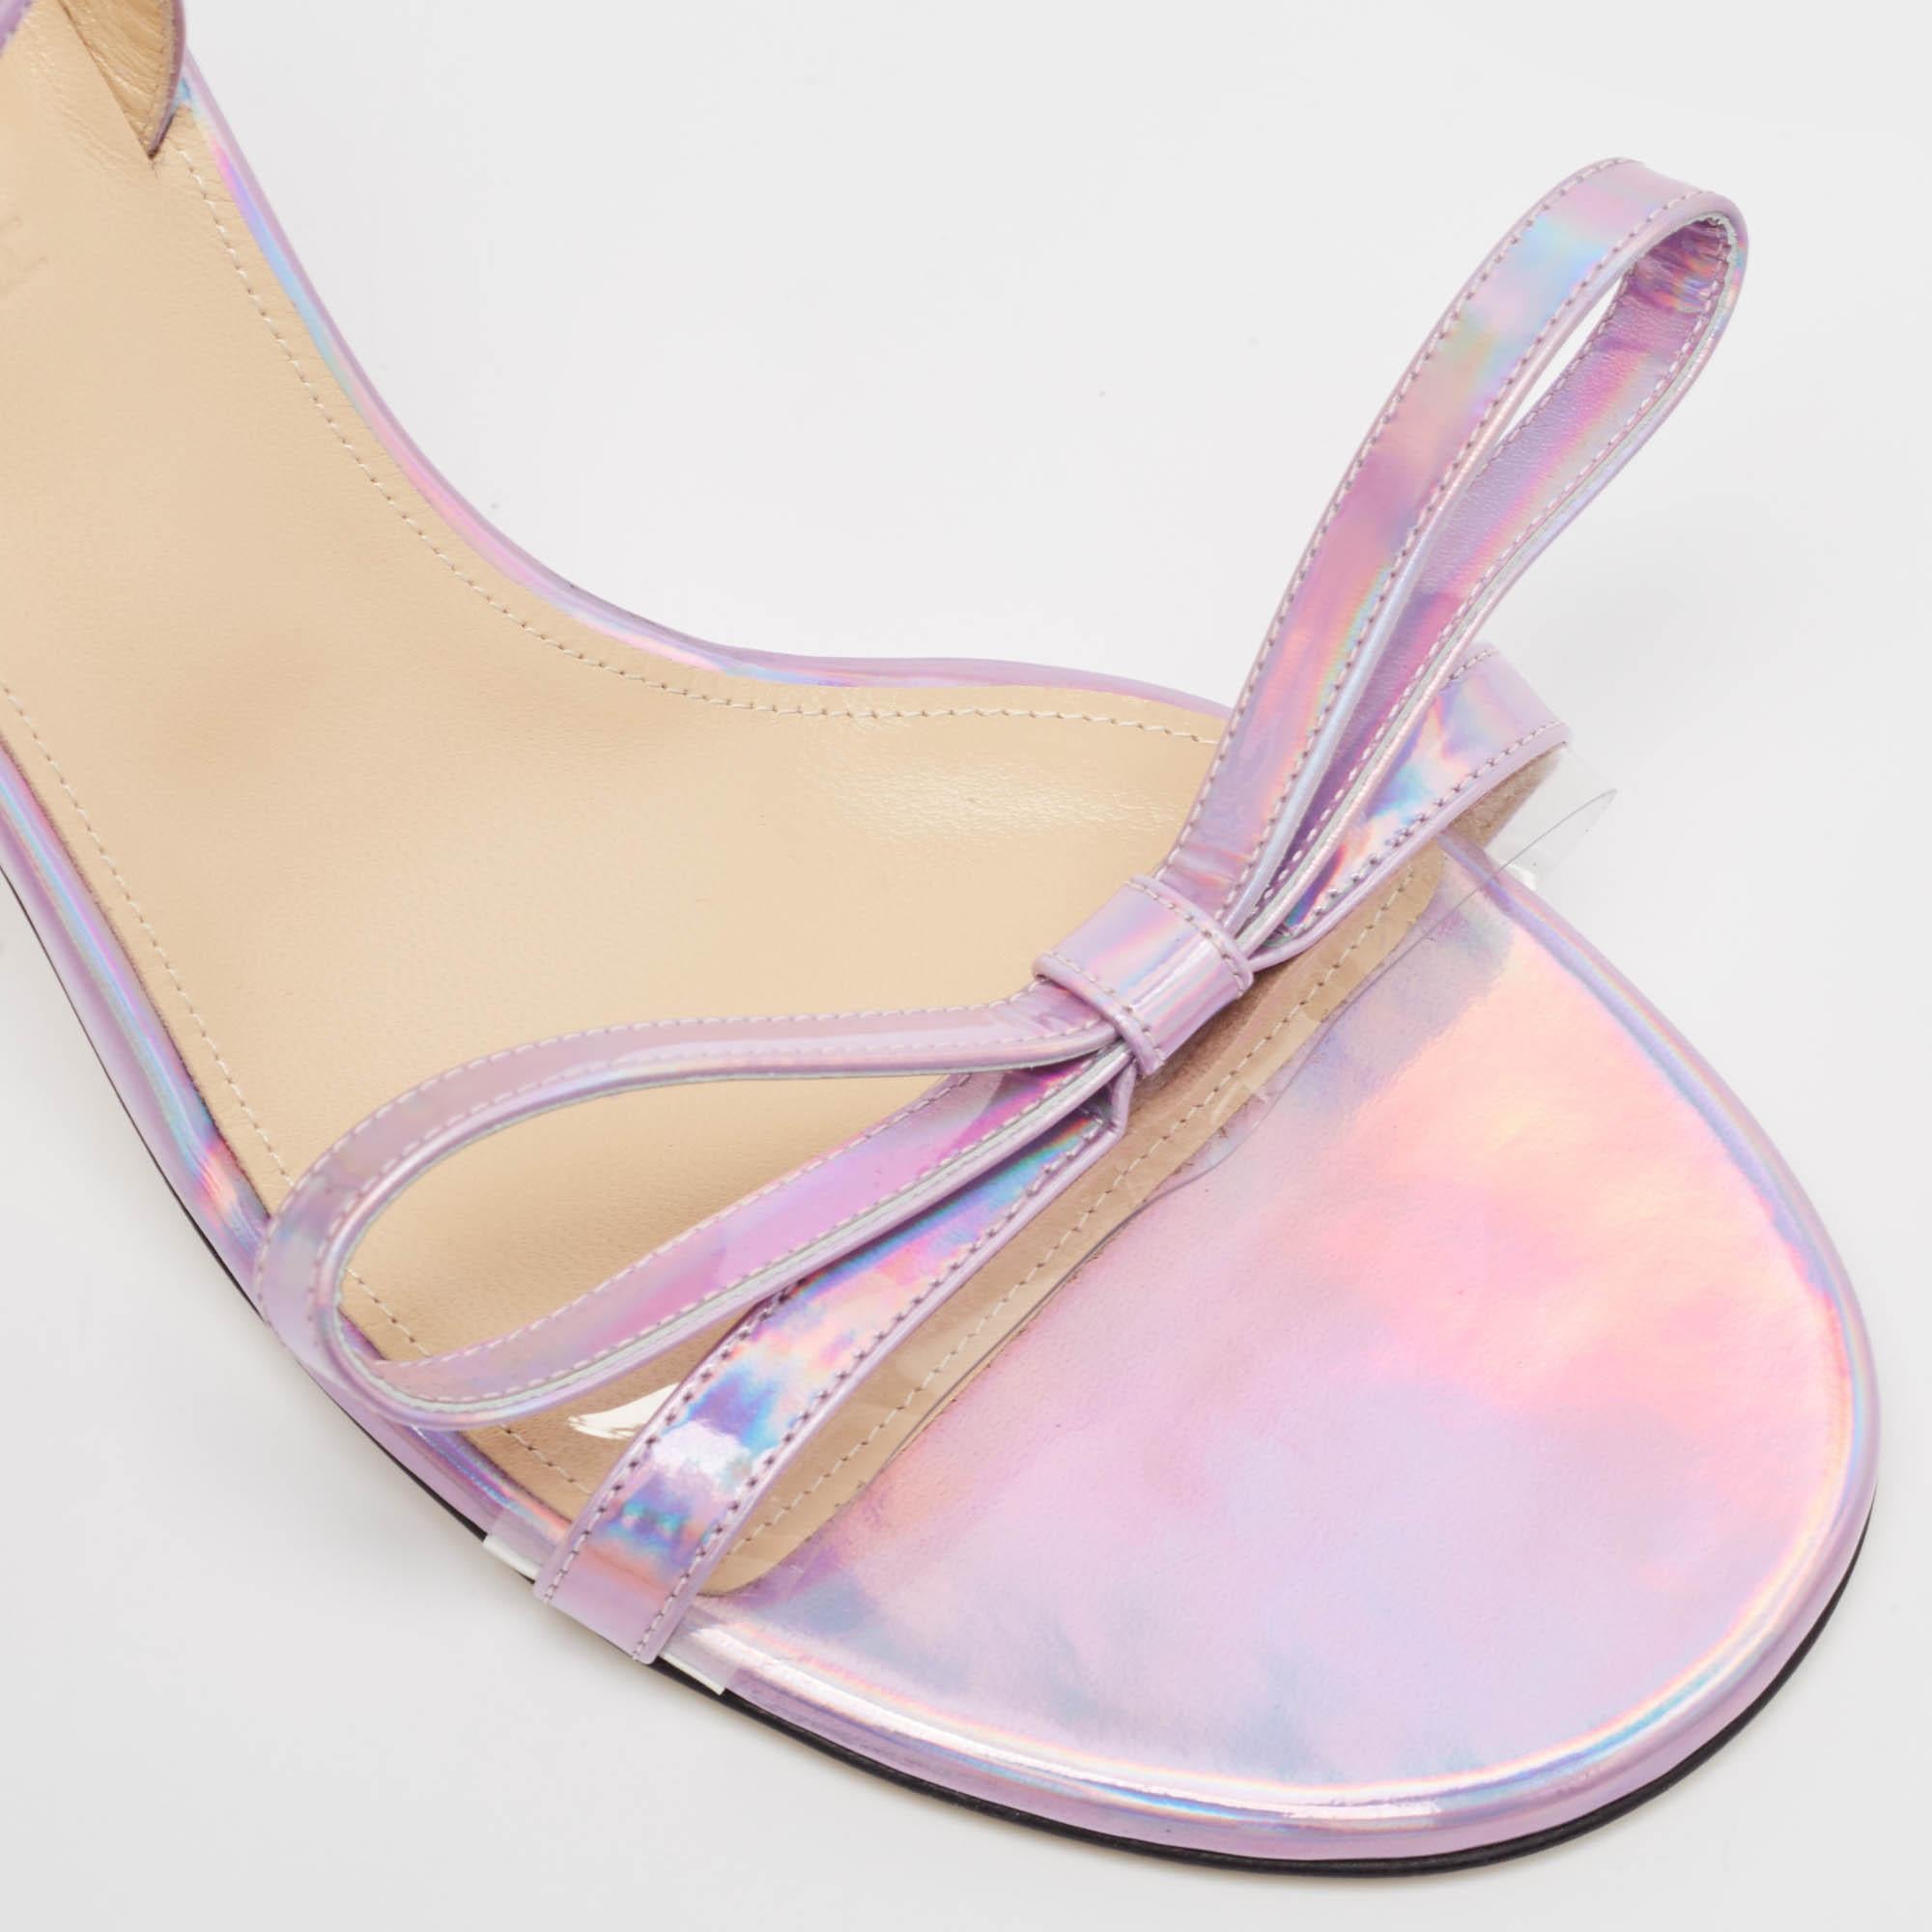 Mach & Mach Purple Iridescent Leather French Bow Sandals Size 40 In Excellent Condition For Sale In Dubai, Al Qouz 2